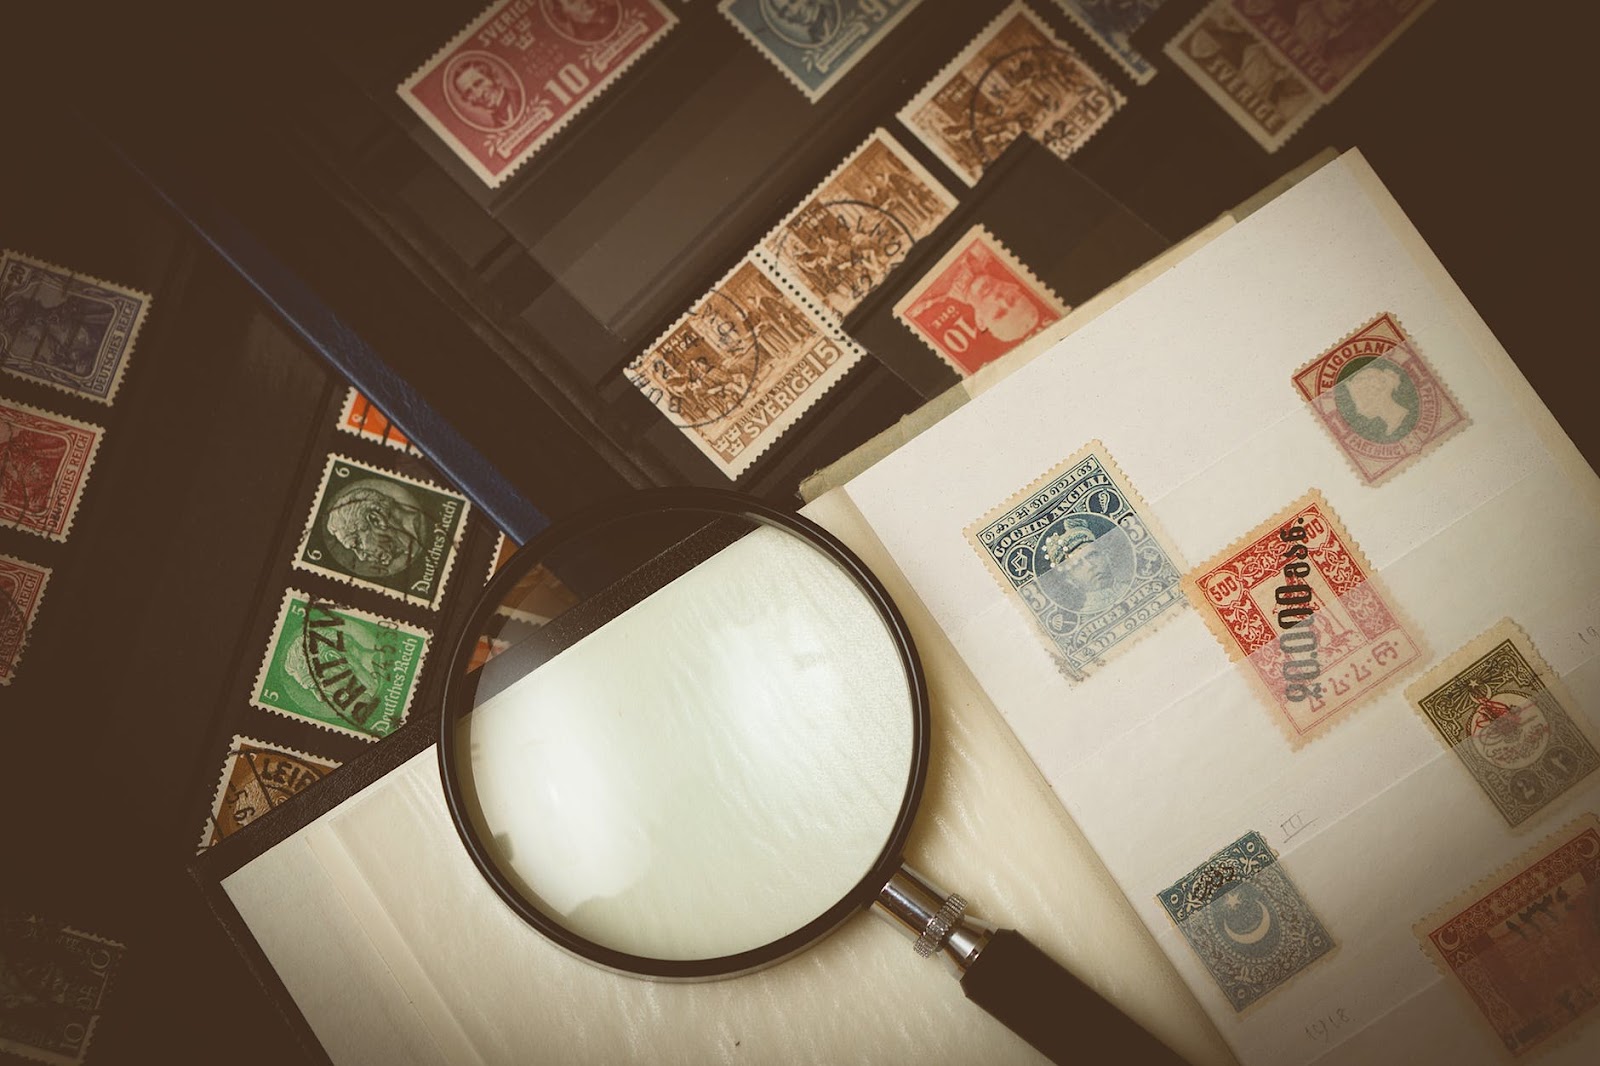 A stamp collection and magnifying glass on a table